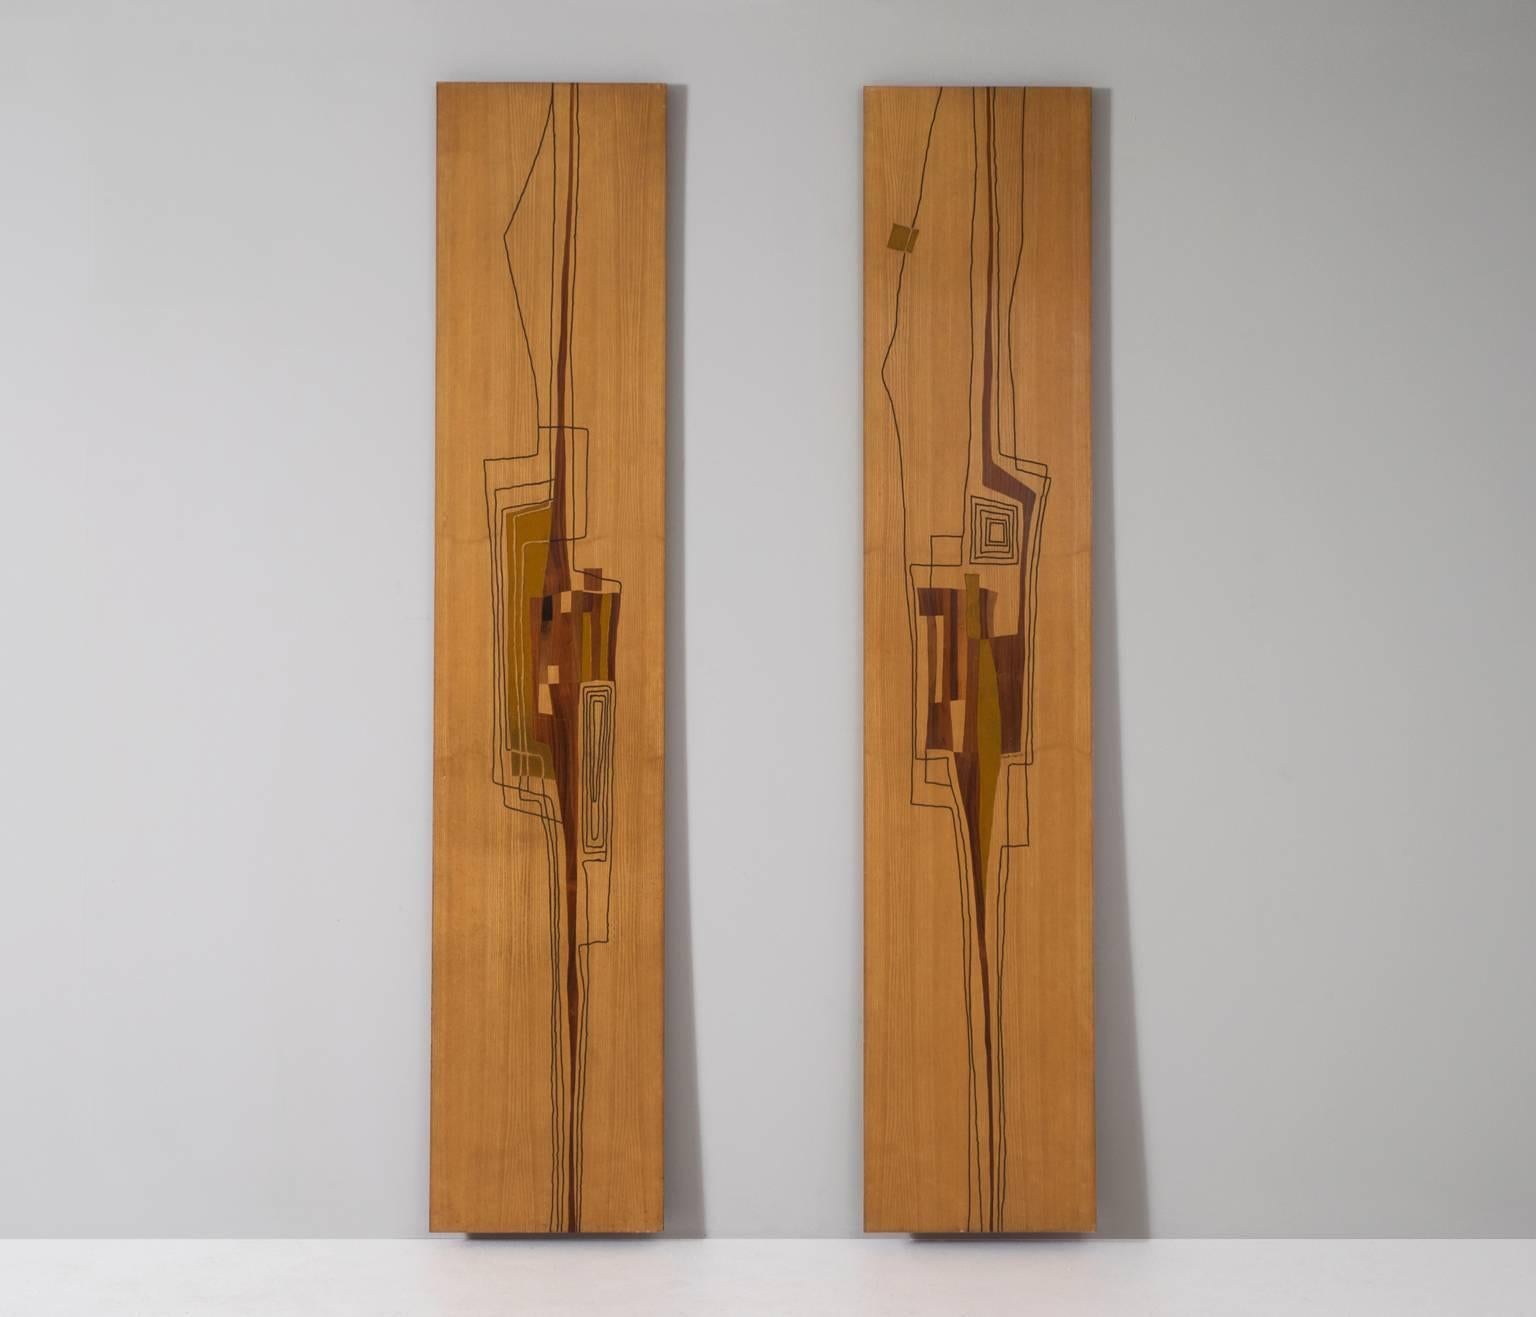 Two decorative wall panels, in wood, by Marcello Siard, Italy 1961.

These two wonderful decorative wall panels, titled 'Pannello', were handmade and signed by the Italian designer Marcello Siard. 
The fairly large wooden panels have been